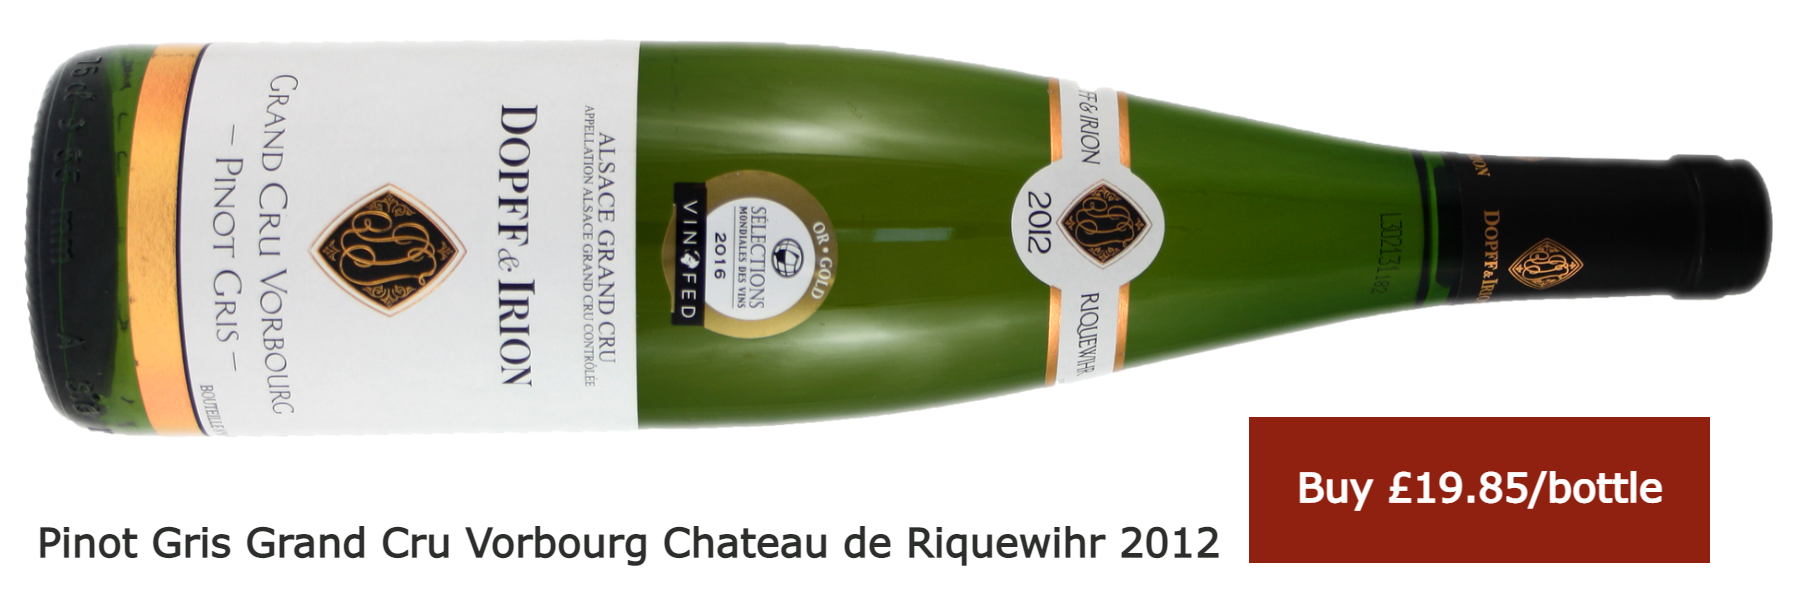 Buy 2012 Grand Cru Vorbourg Pinot Gris £19.85/bottle